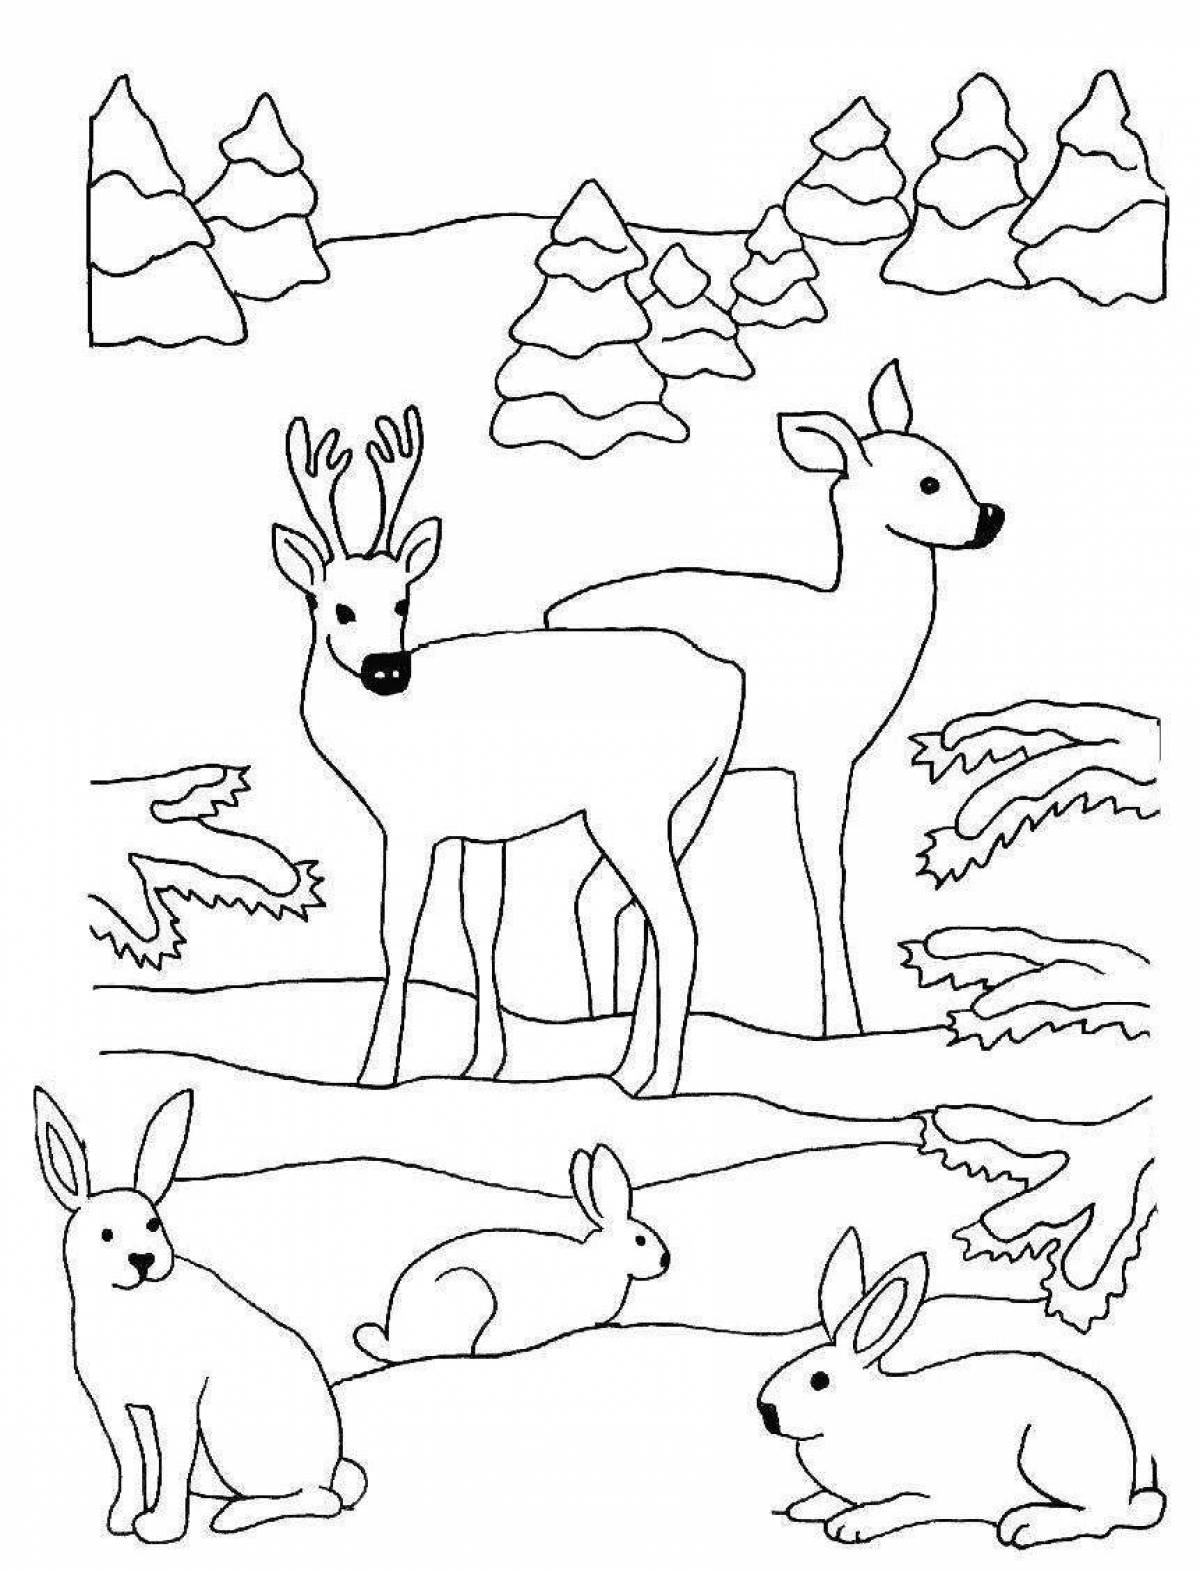 Fun coloring of forest animals